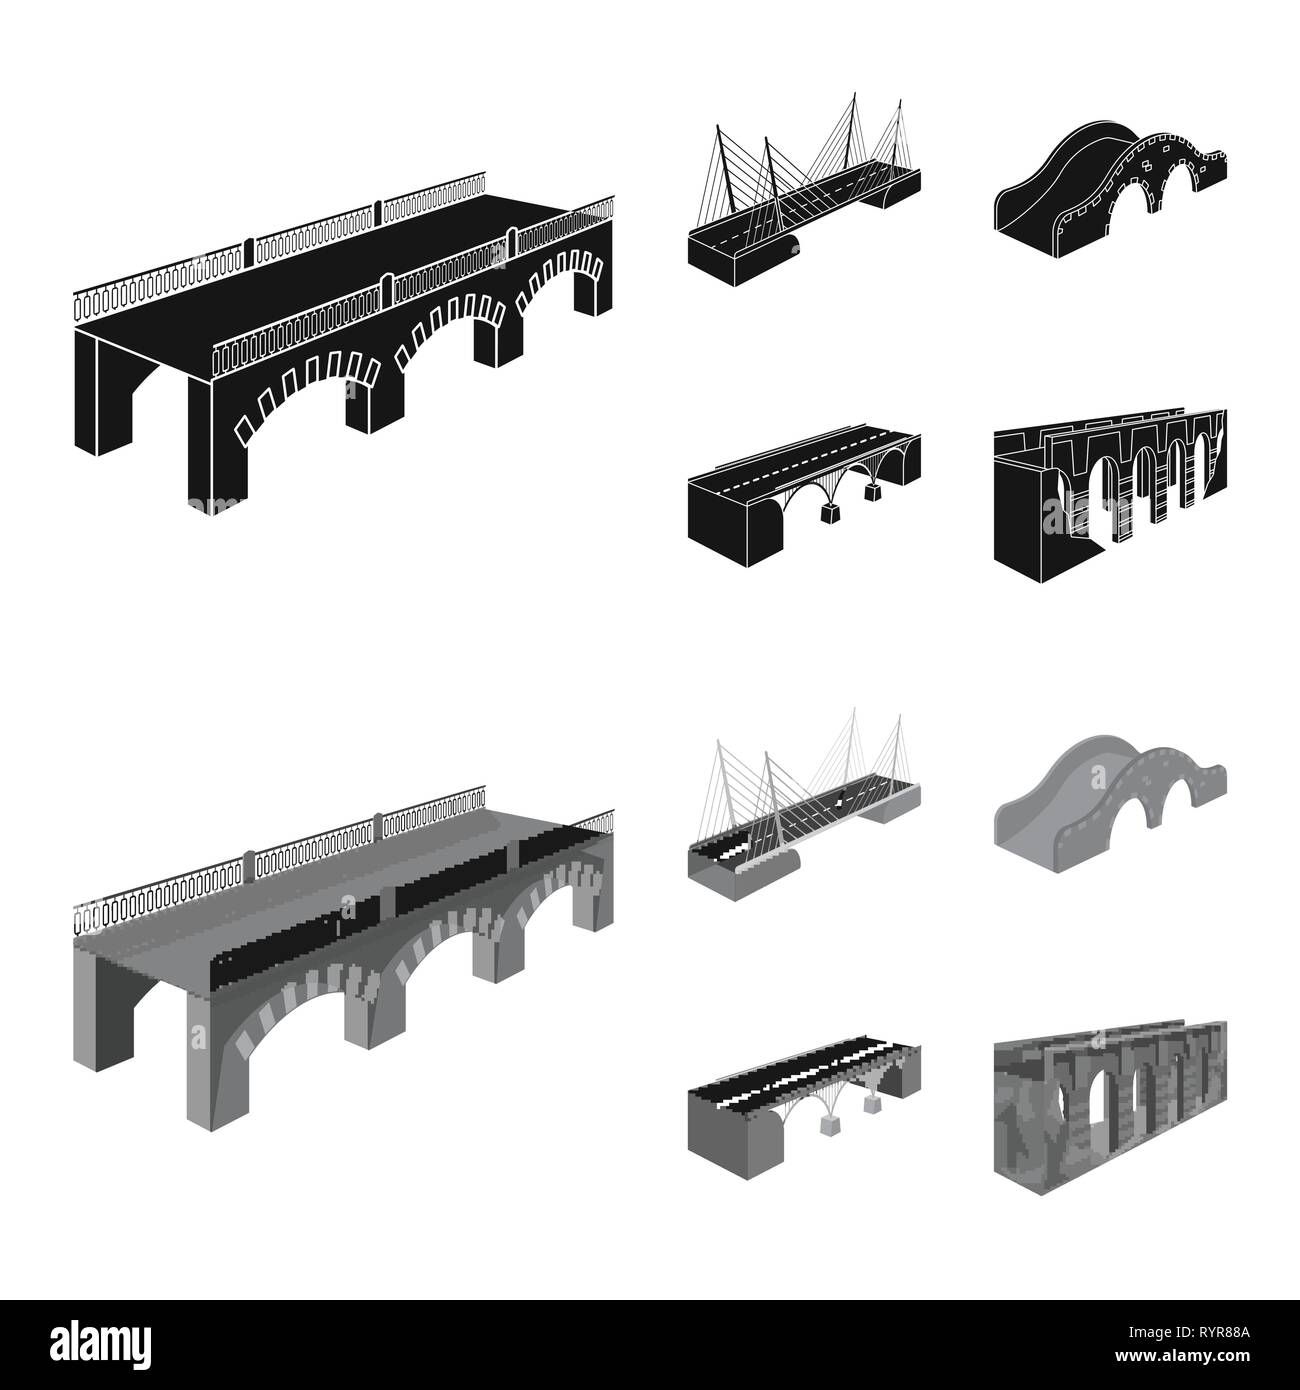 bridge,relocation,construction,pedestrian,mounted,prop,cable,historical,coast,column,suspended,arch,river,brick,metal,old,showplace,transport,modern,countryside,bike,long,connection,design,construct,side,bridgework,architecture,landmark,structure,crossing,sight,set,vector,icon,illustration,isolated,collection,element,graphic,sign Vector Vectors , Stock Vector